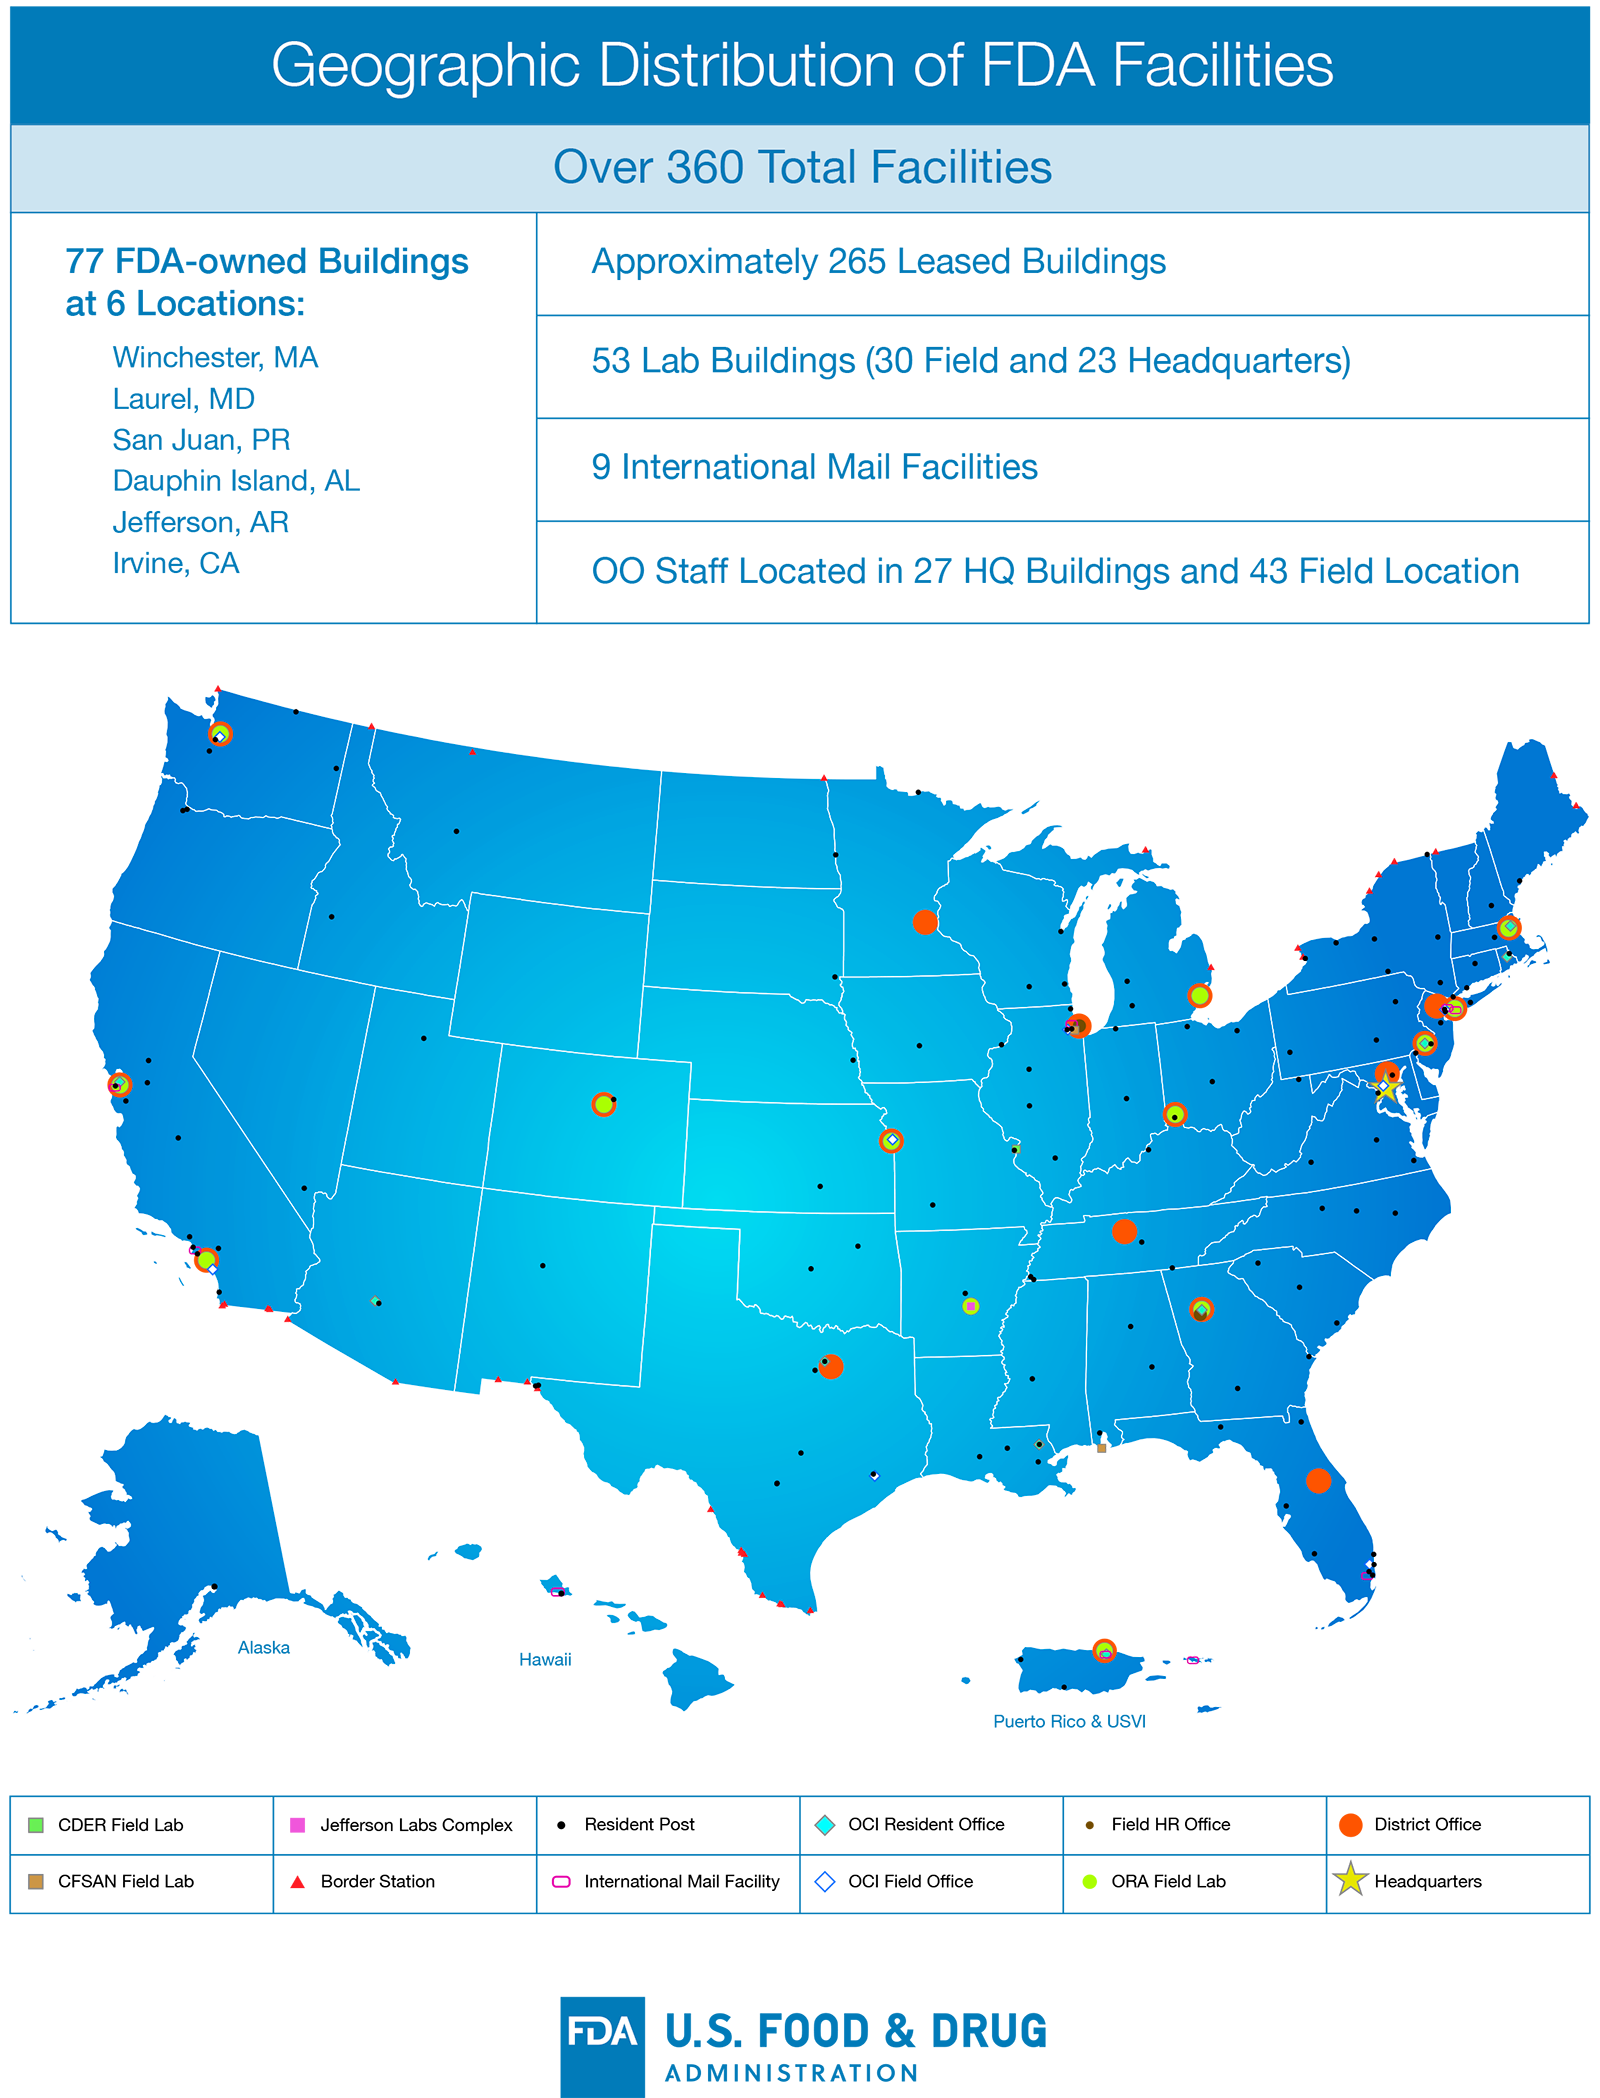 Geographic distribution of FDA facilities (over 360 total) with map of U.S., Puerto Rico, and USVI showing locations of 77 FDA-owned buildings and approximately 265 leased buildings.